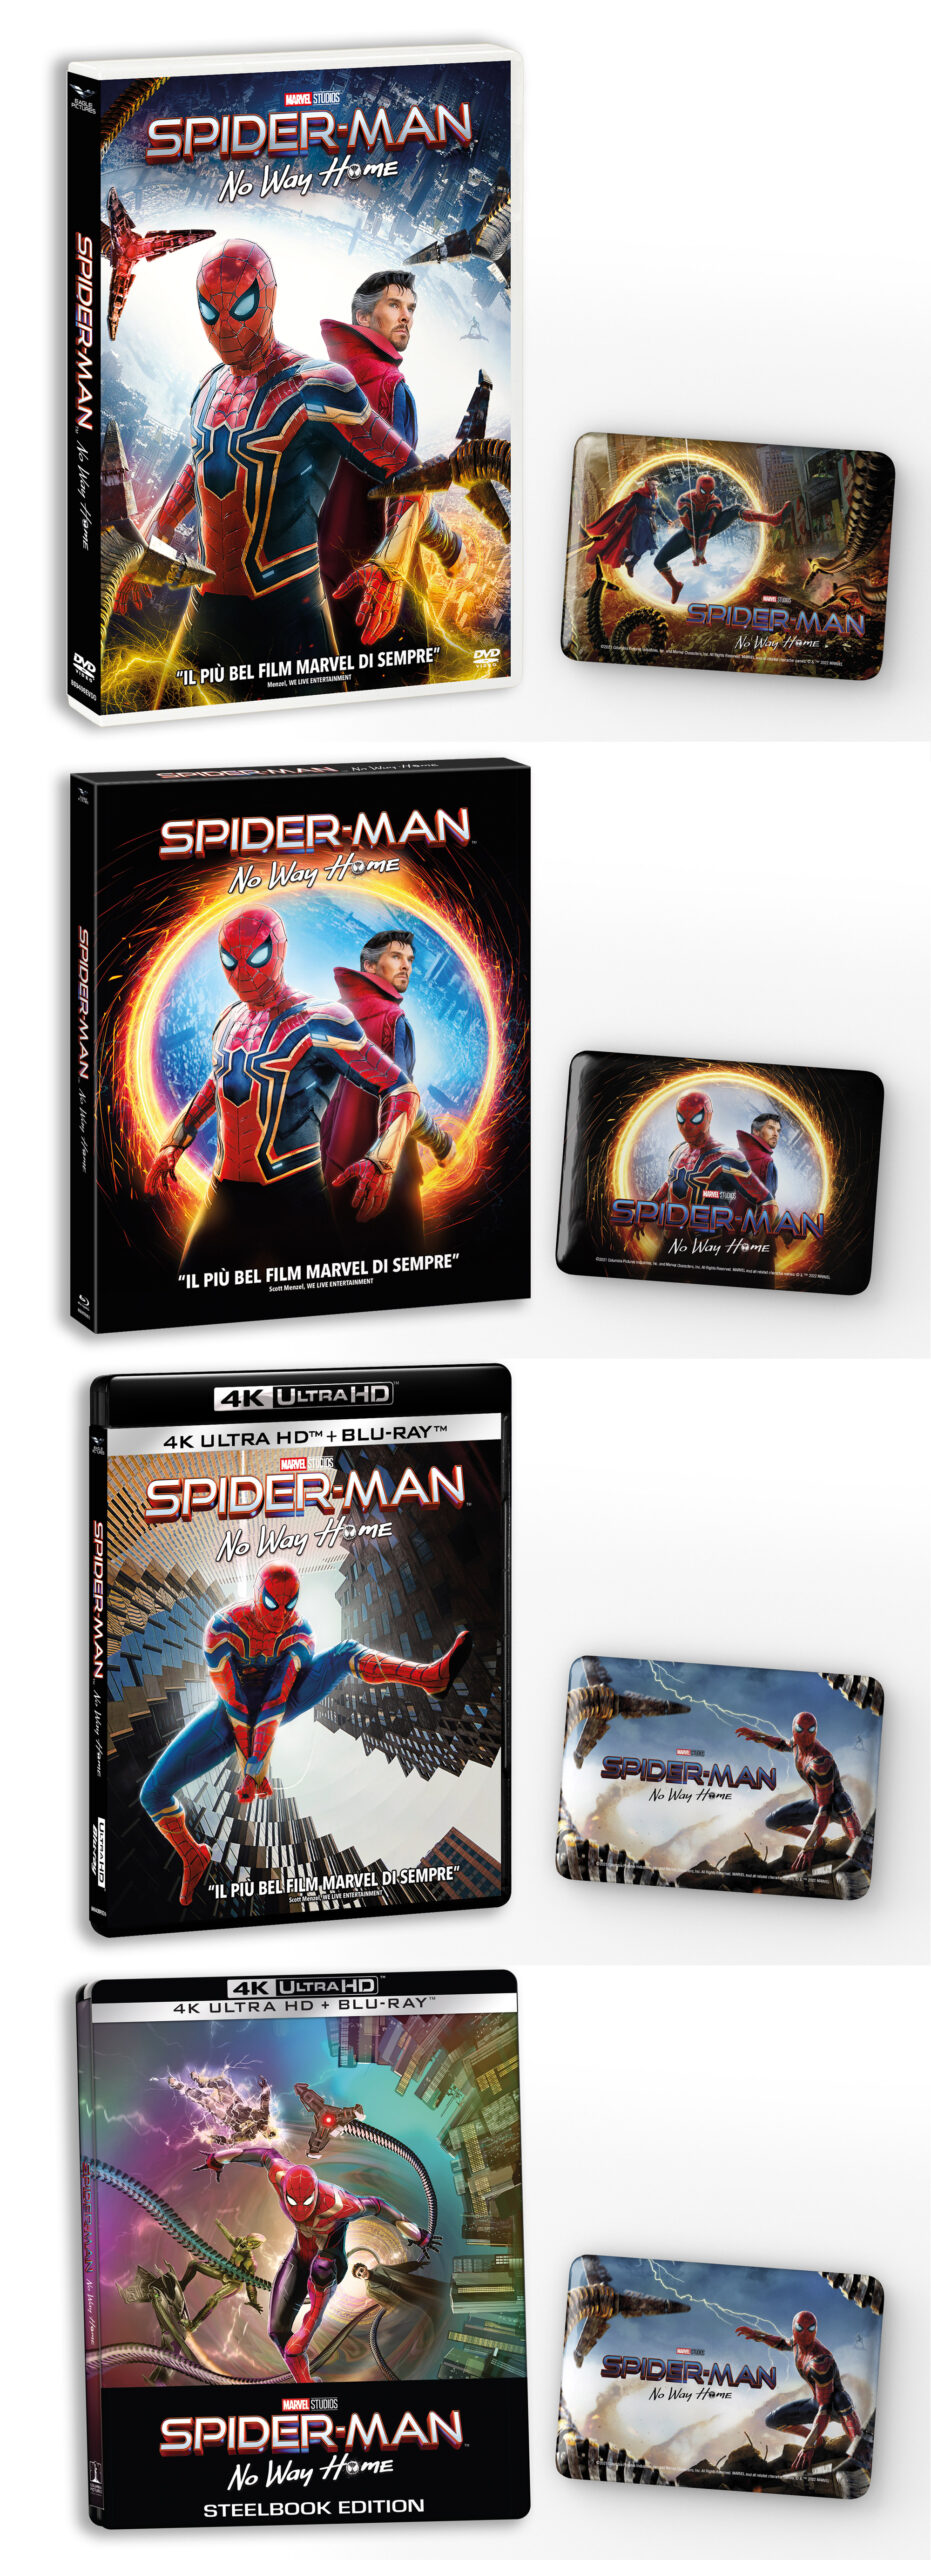 Spider-Man: No Way Home in DVD e Blu-ray